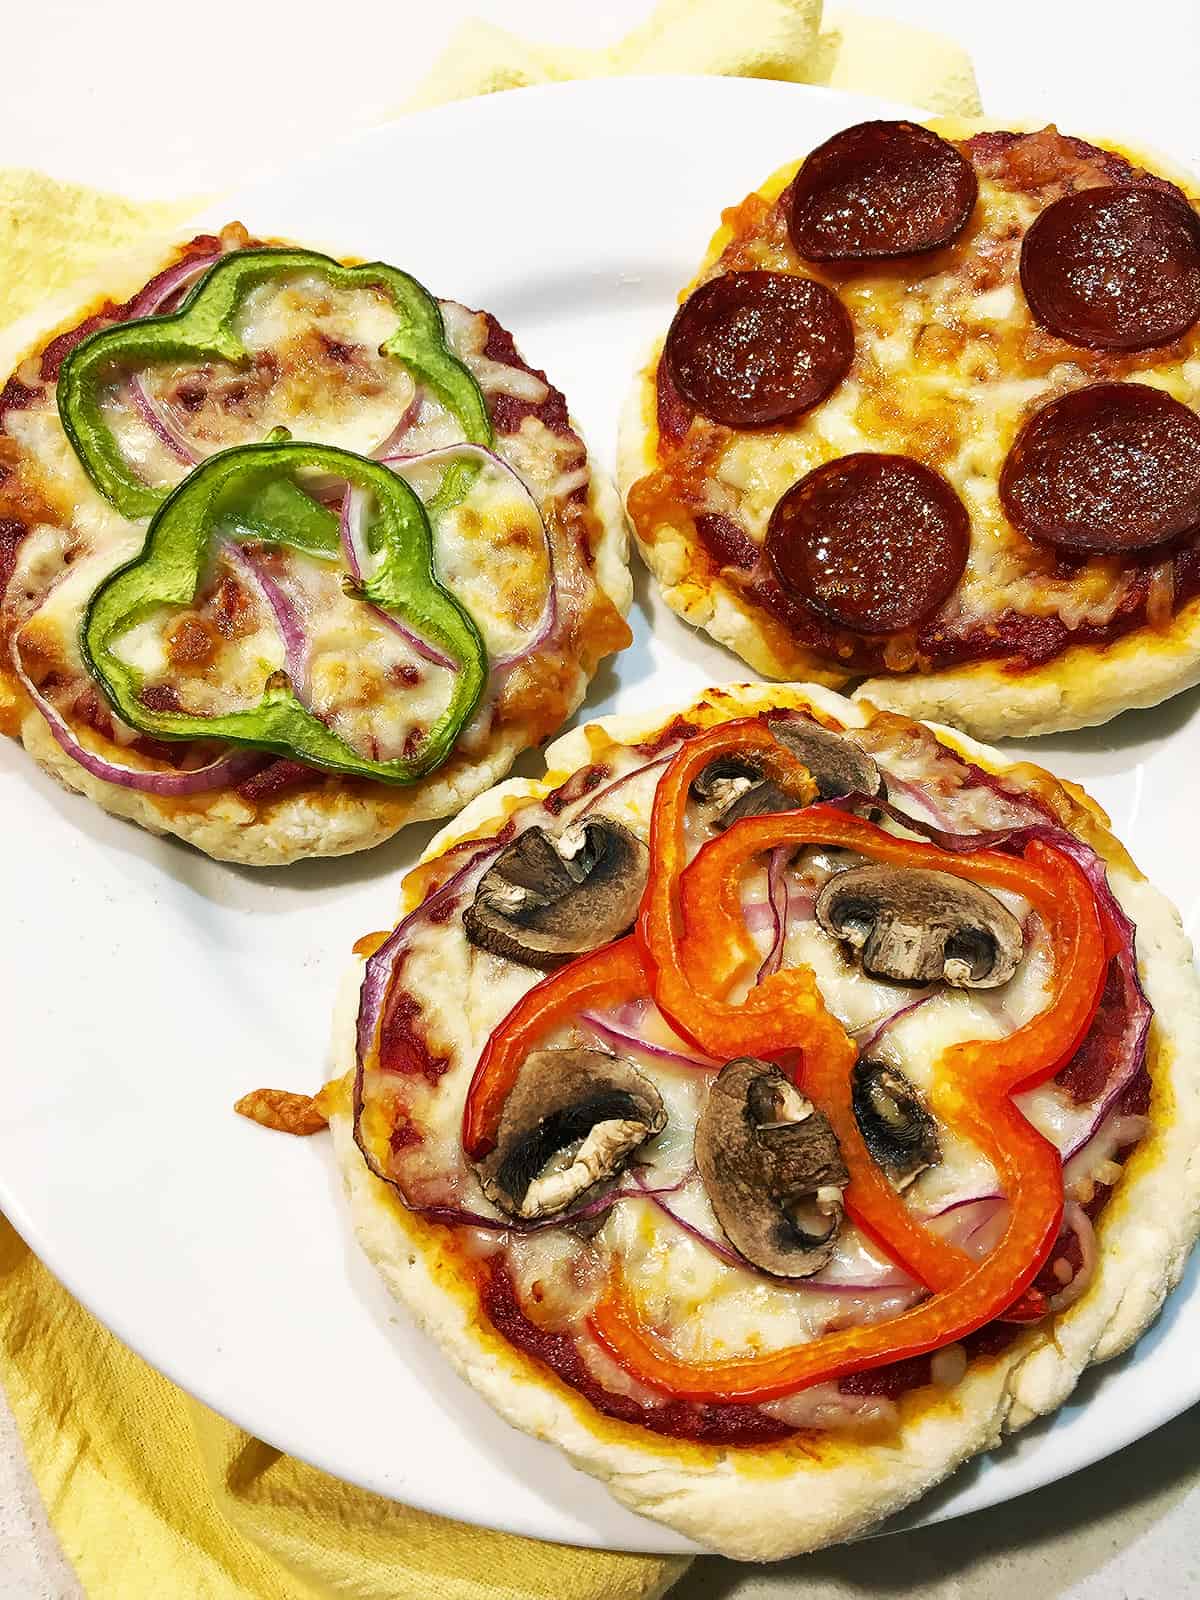 Three mini pizzas with various toppings on a white plate with a blue and tan plaid napkin